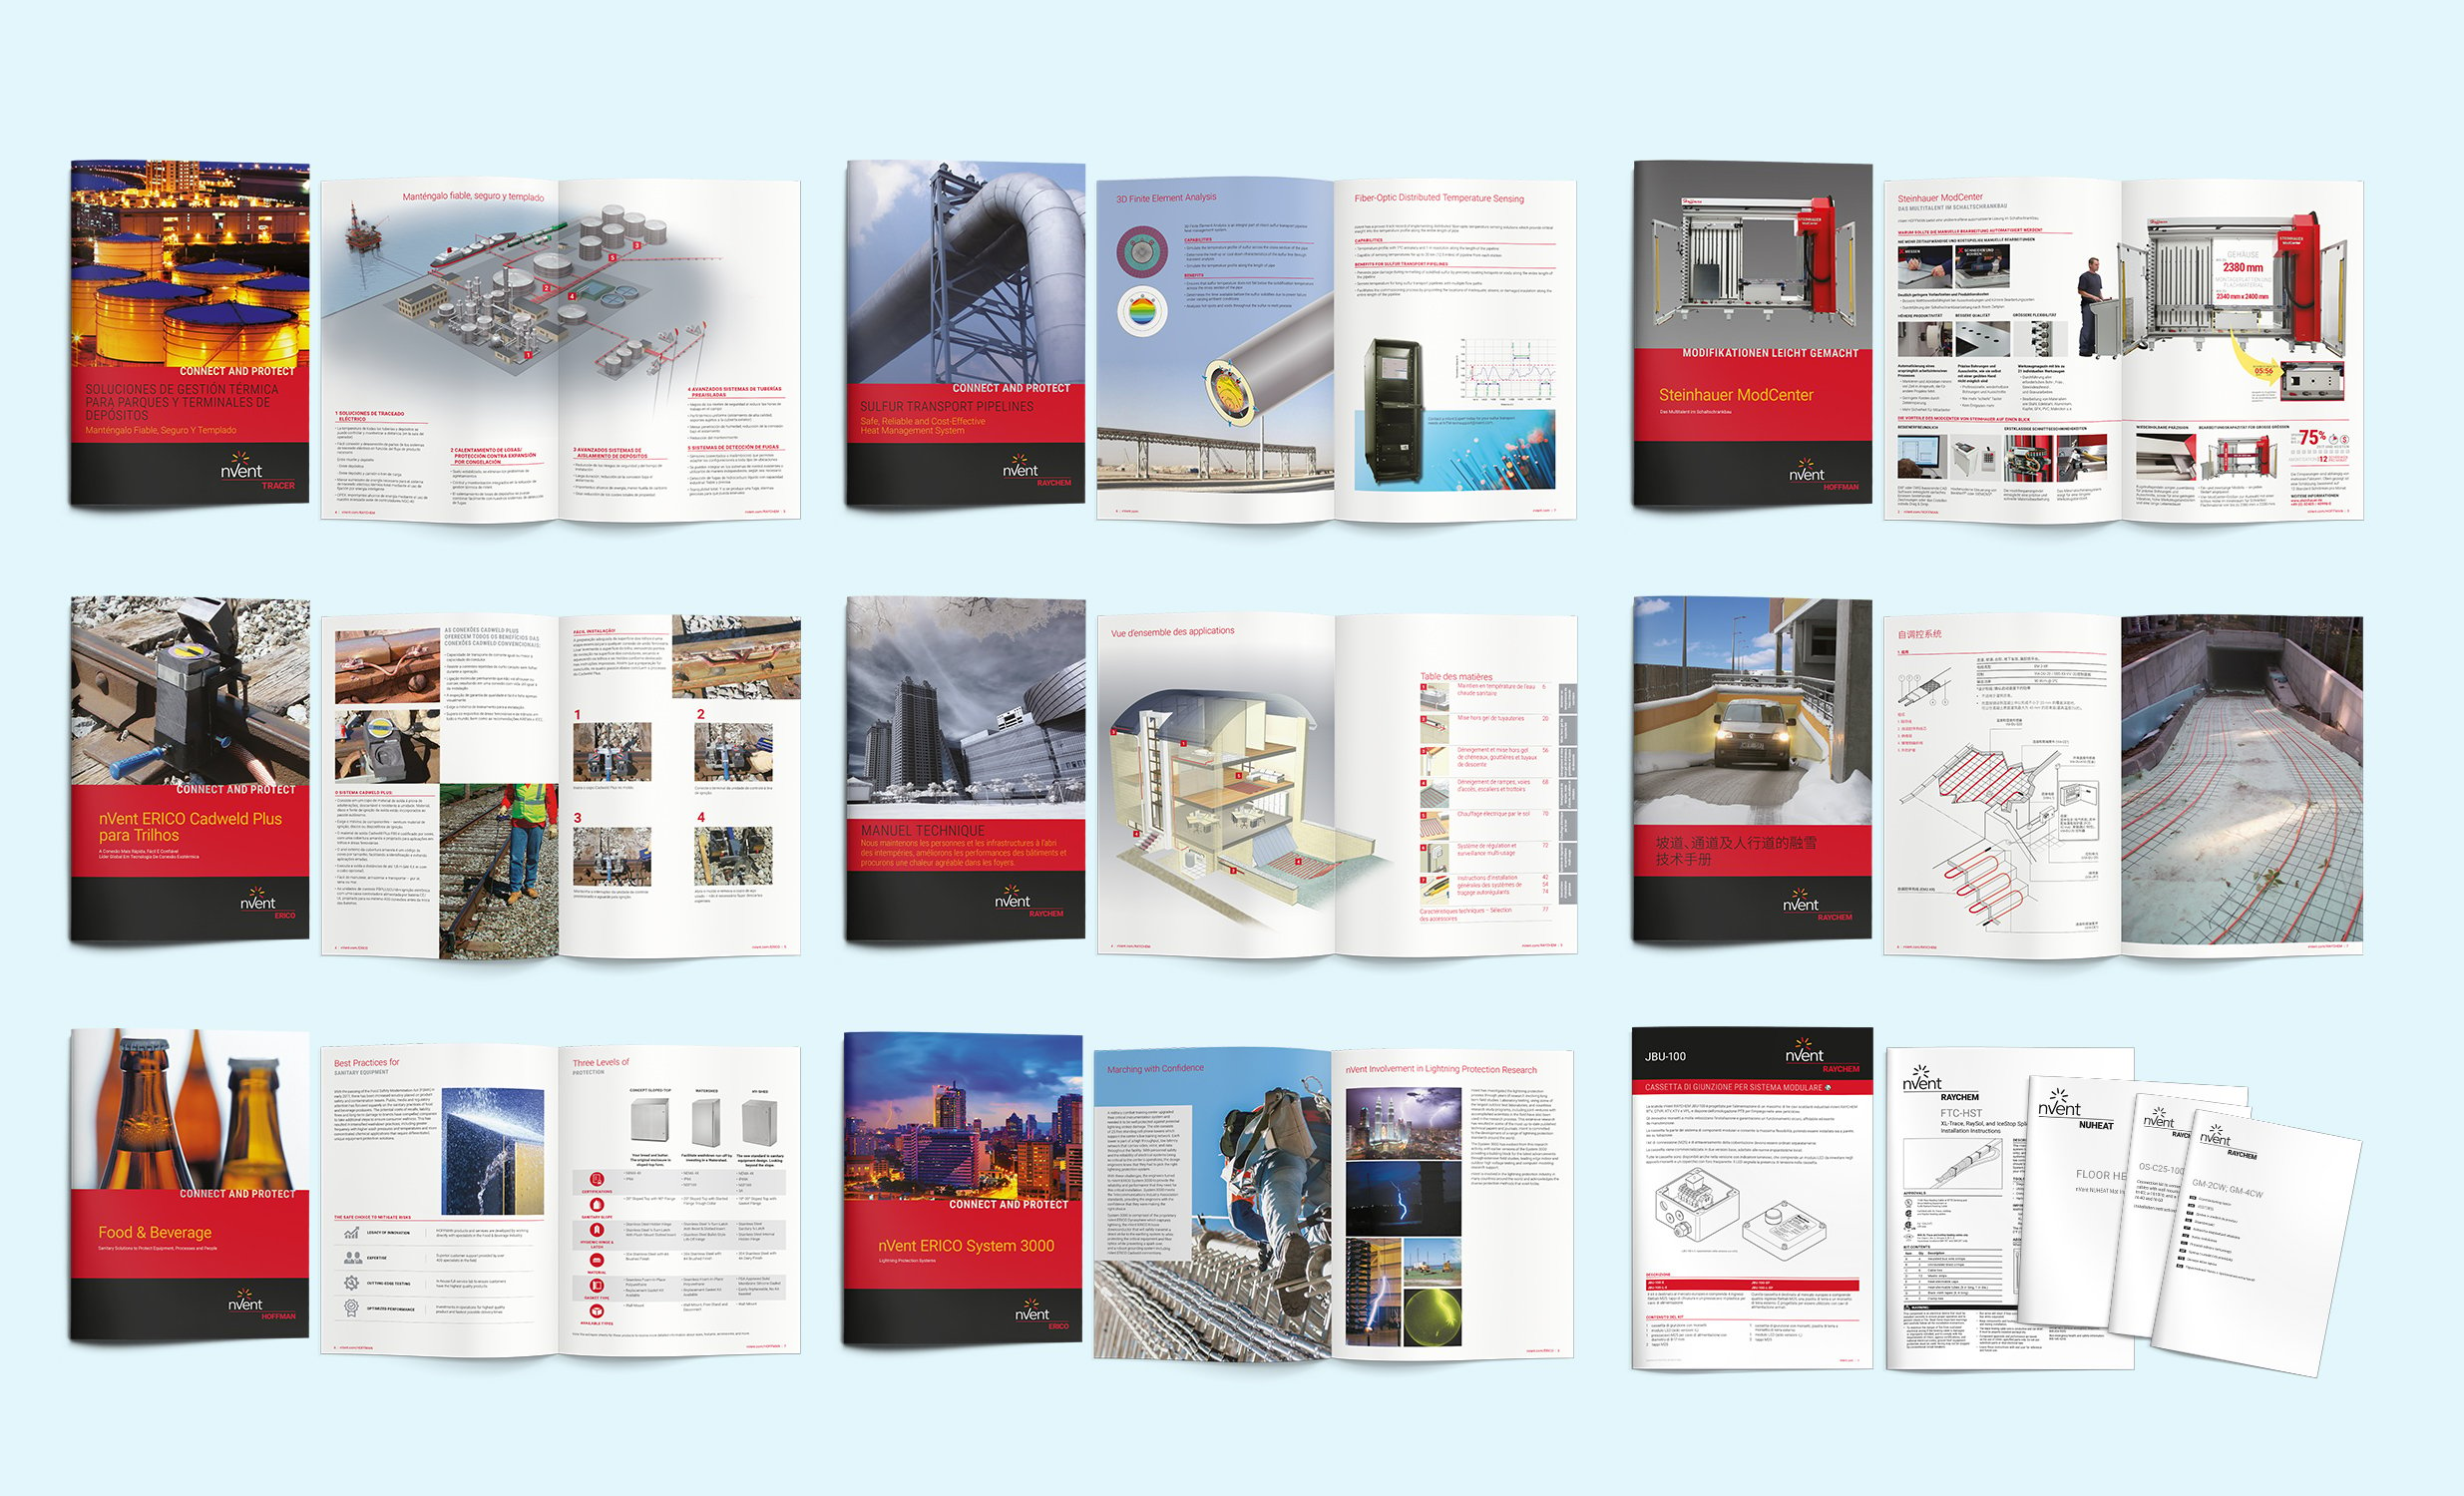 Accurate and comprehensive product brochures are key to the sales strategy for a business such as Pentair